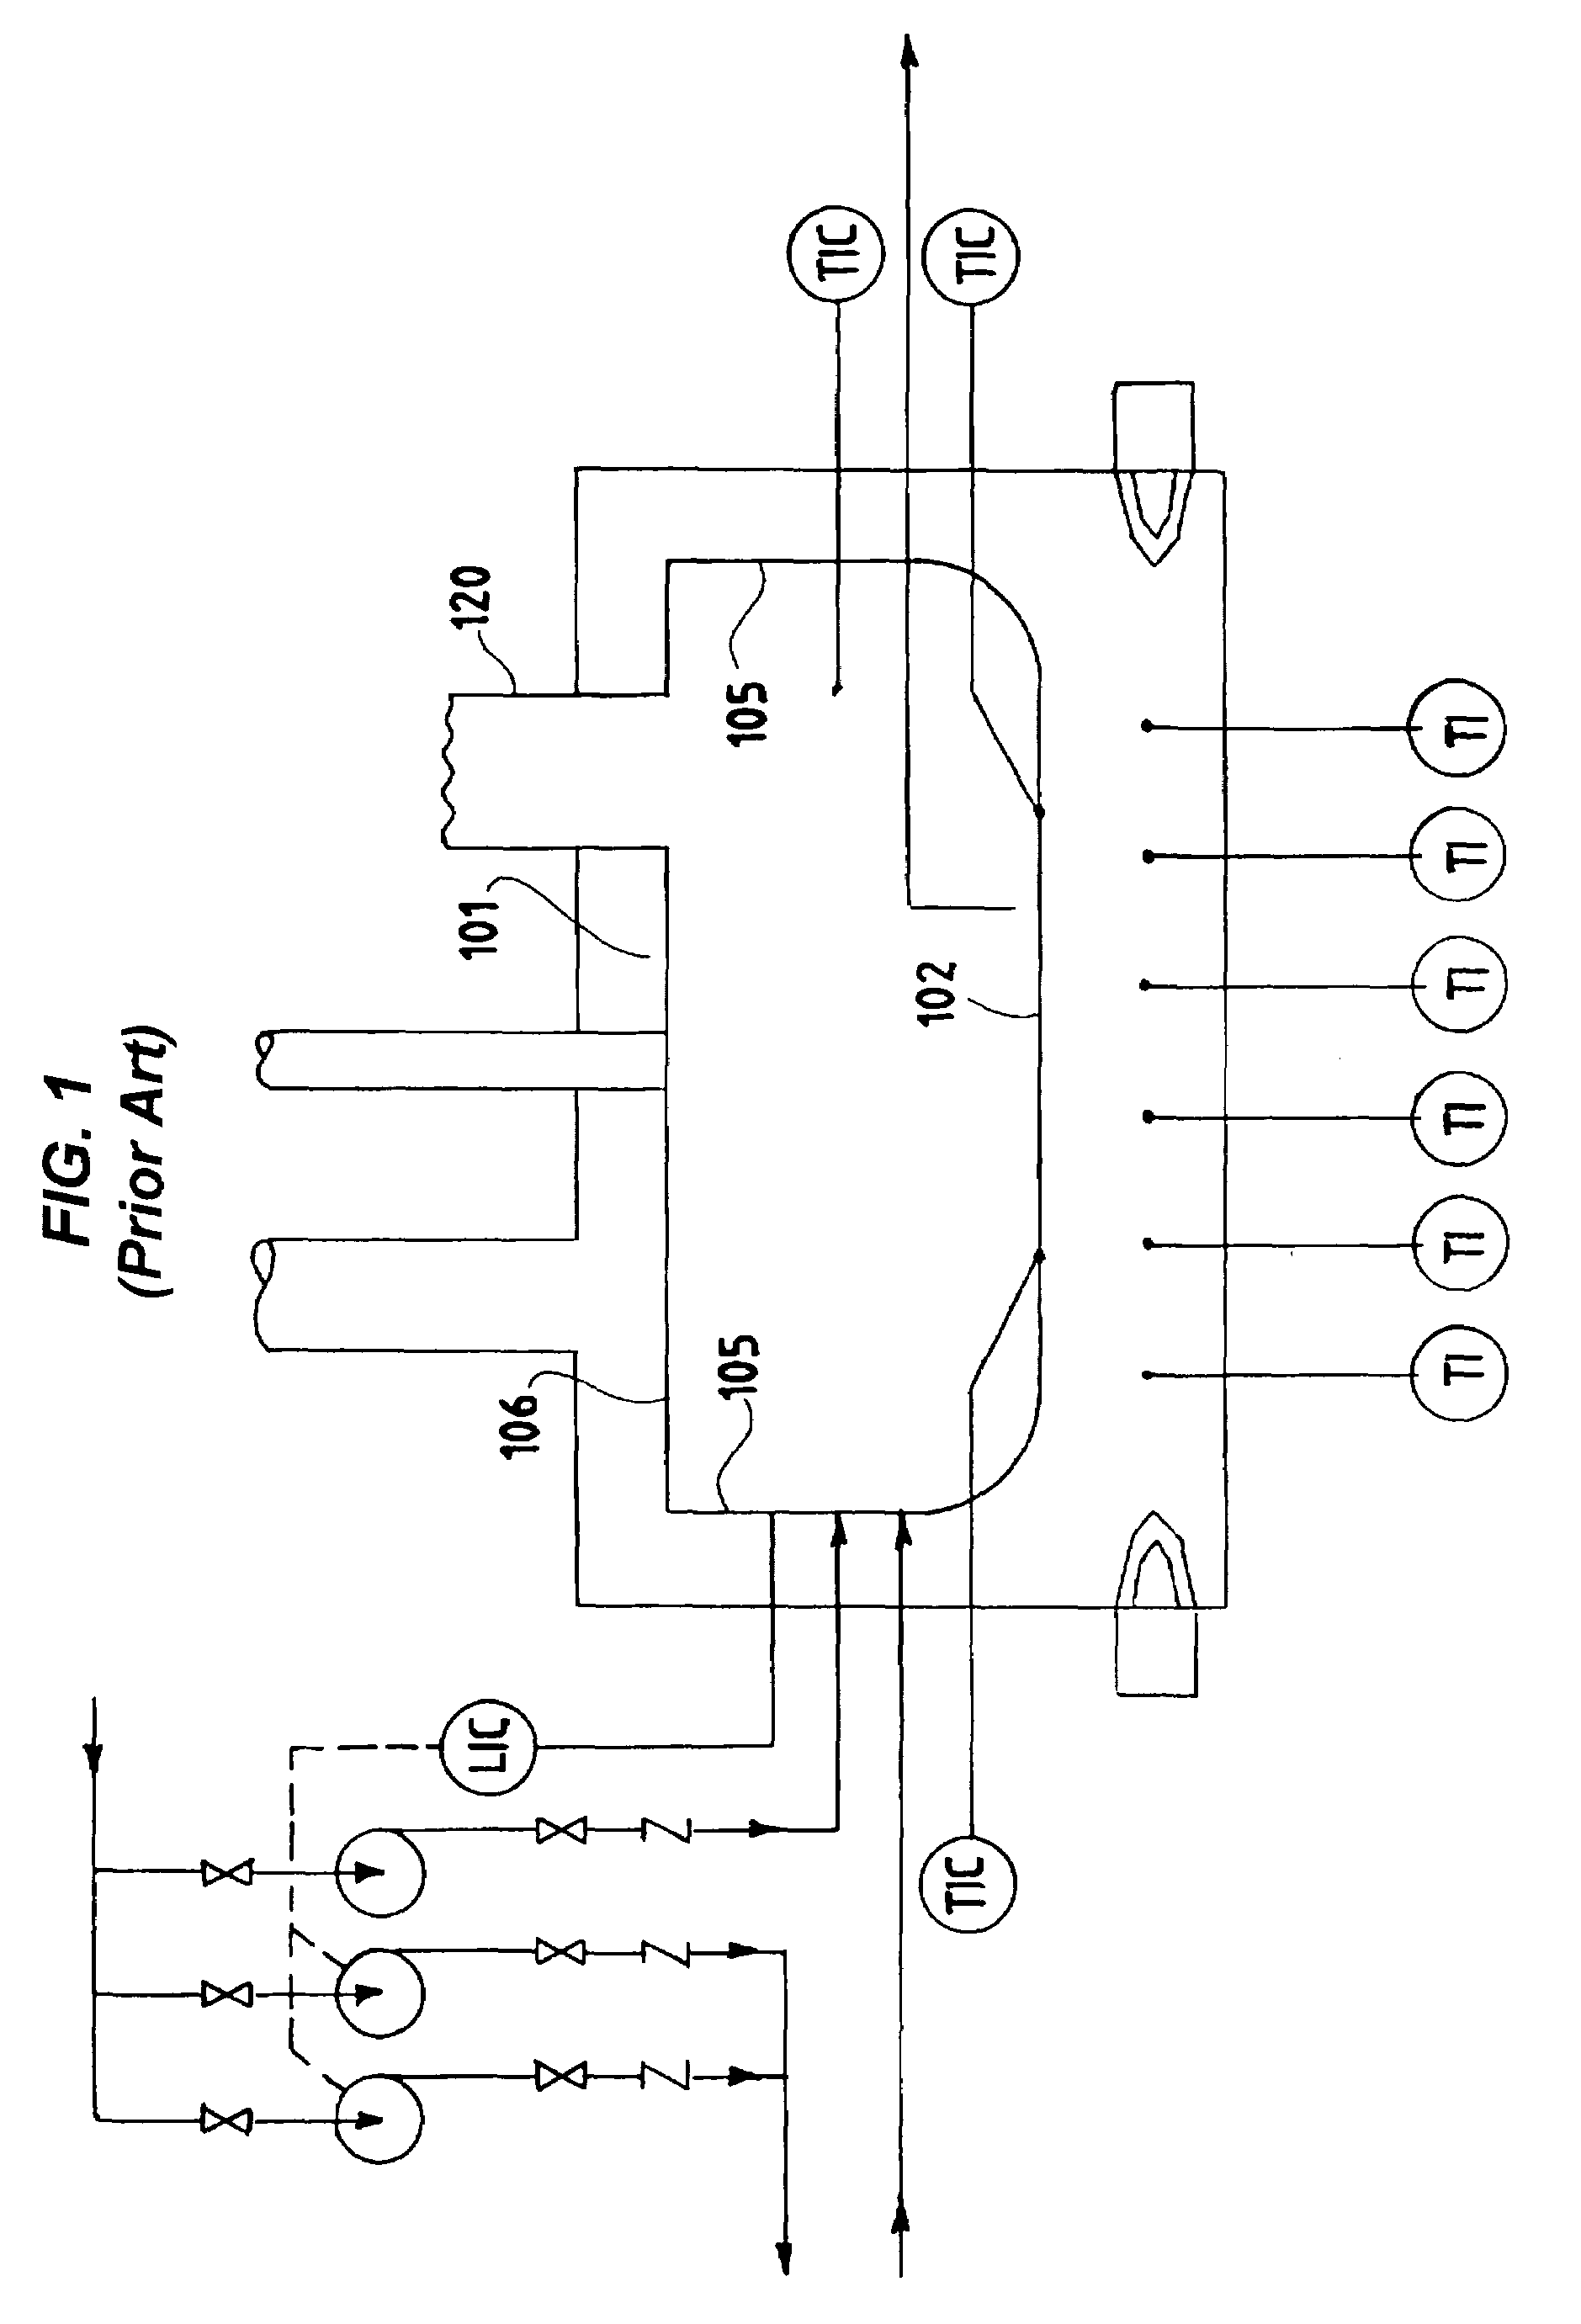 Apparatus and process for treatment of waste oils